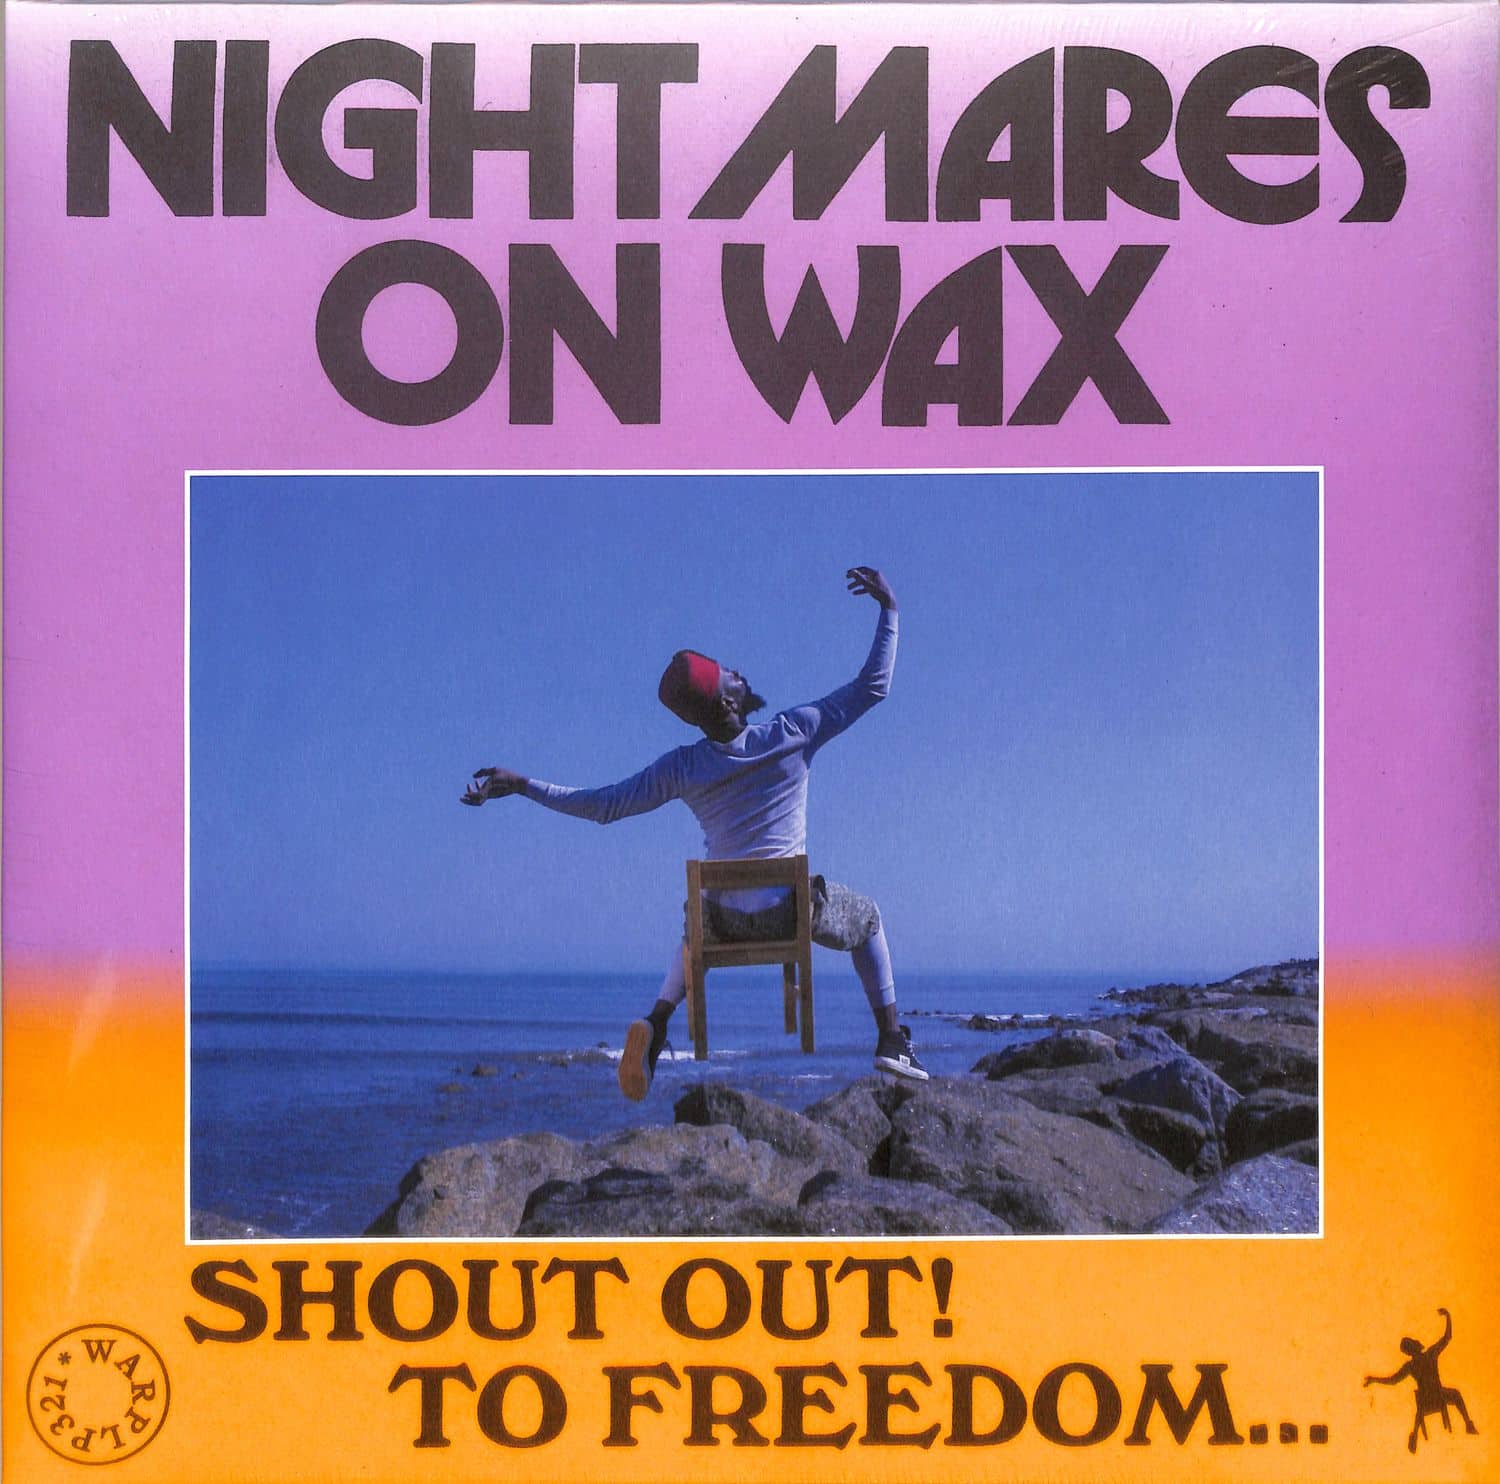 Nightmares On Wax - SHOUT OUT! TO FREEDOM... 